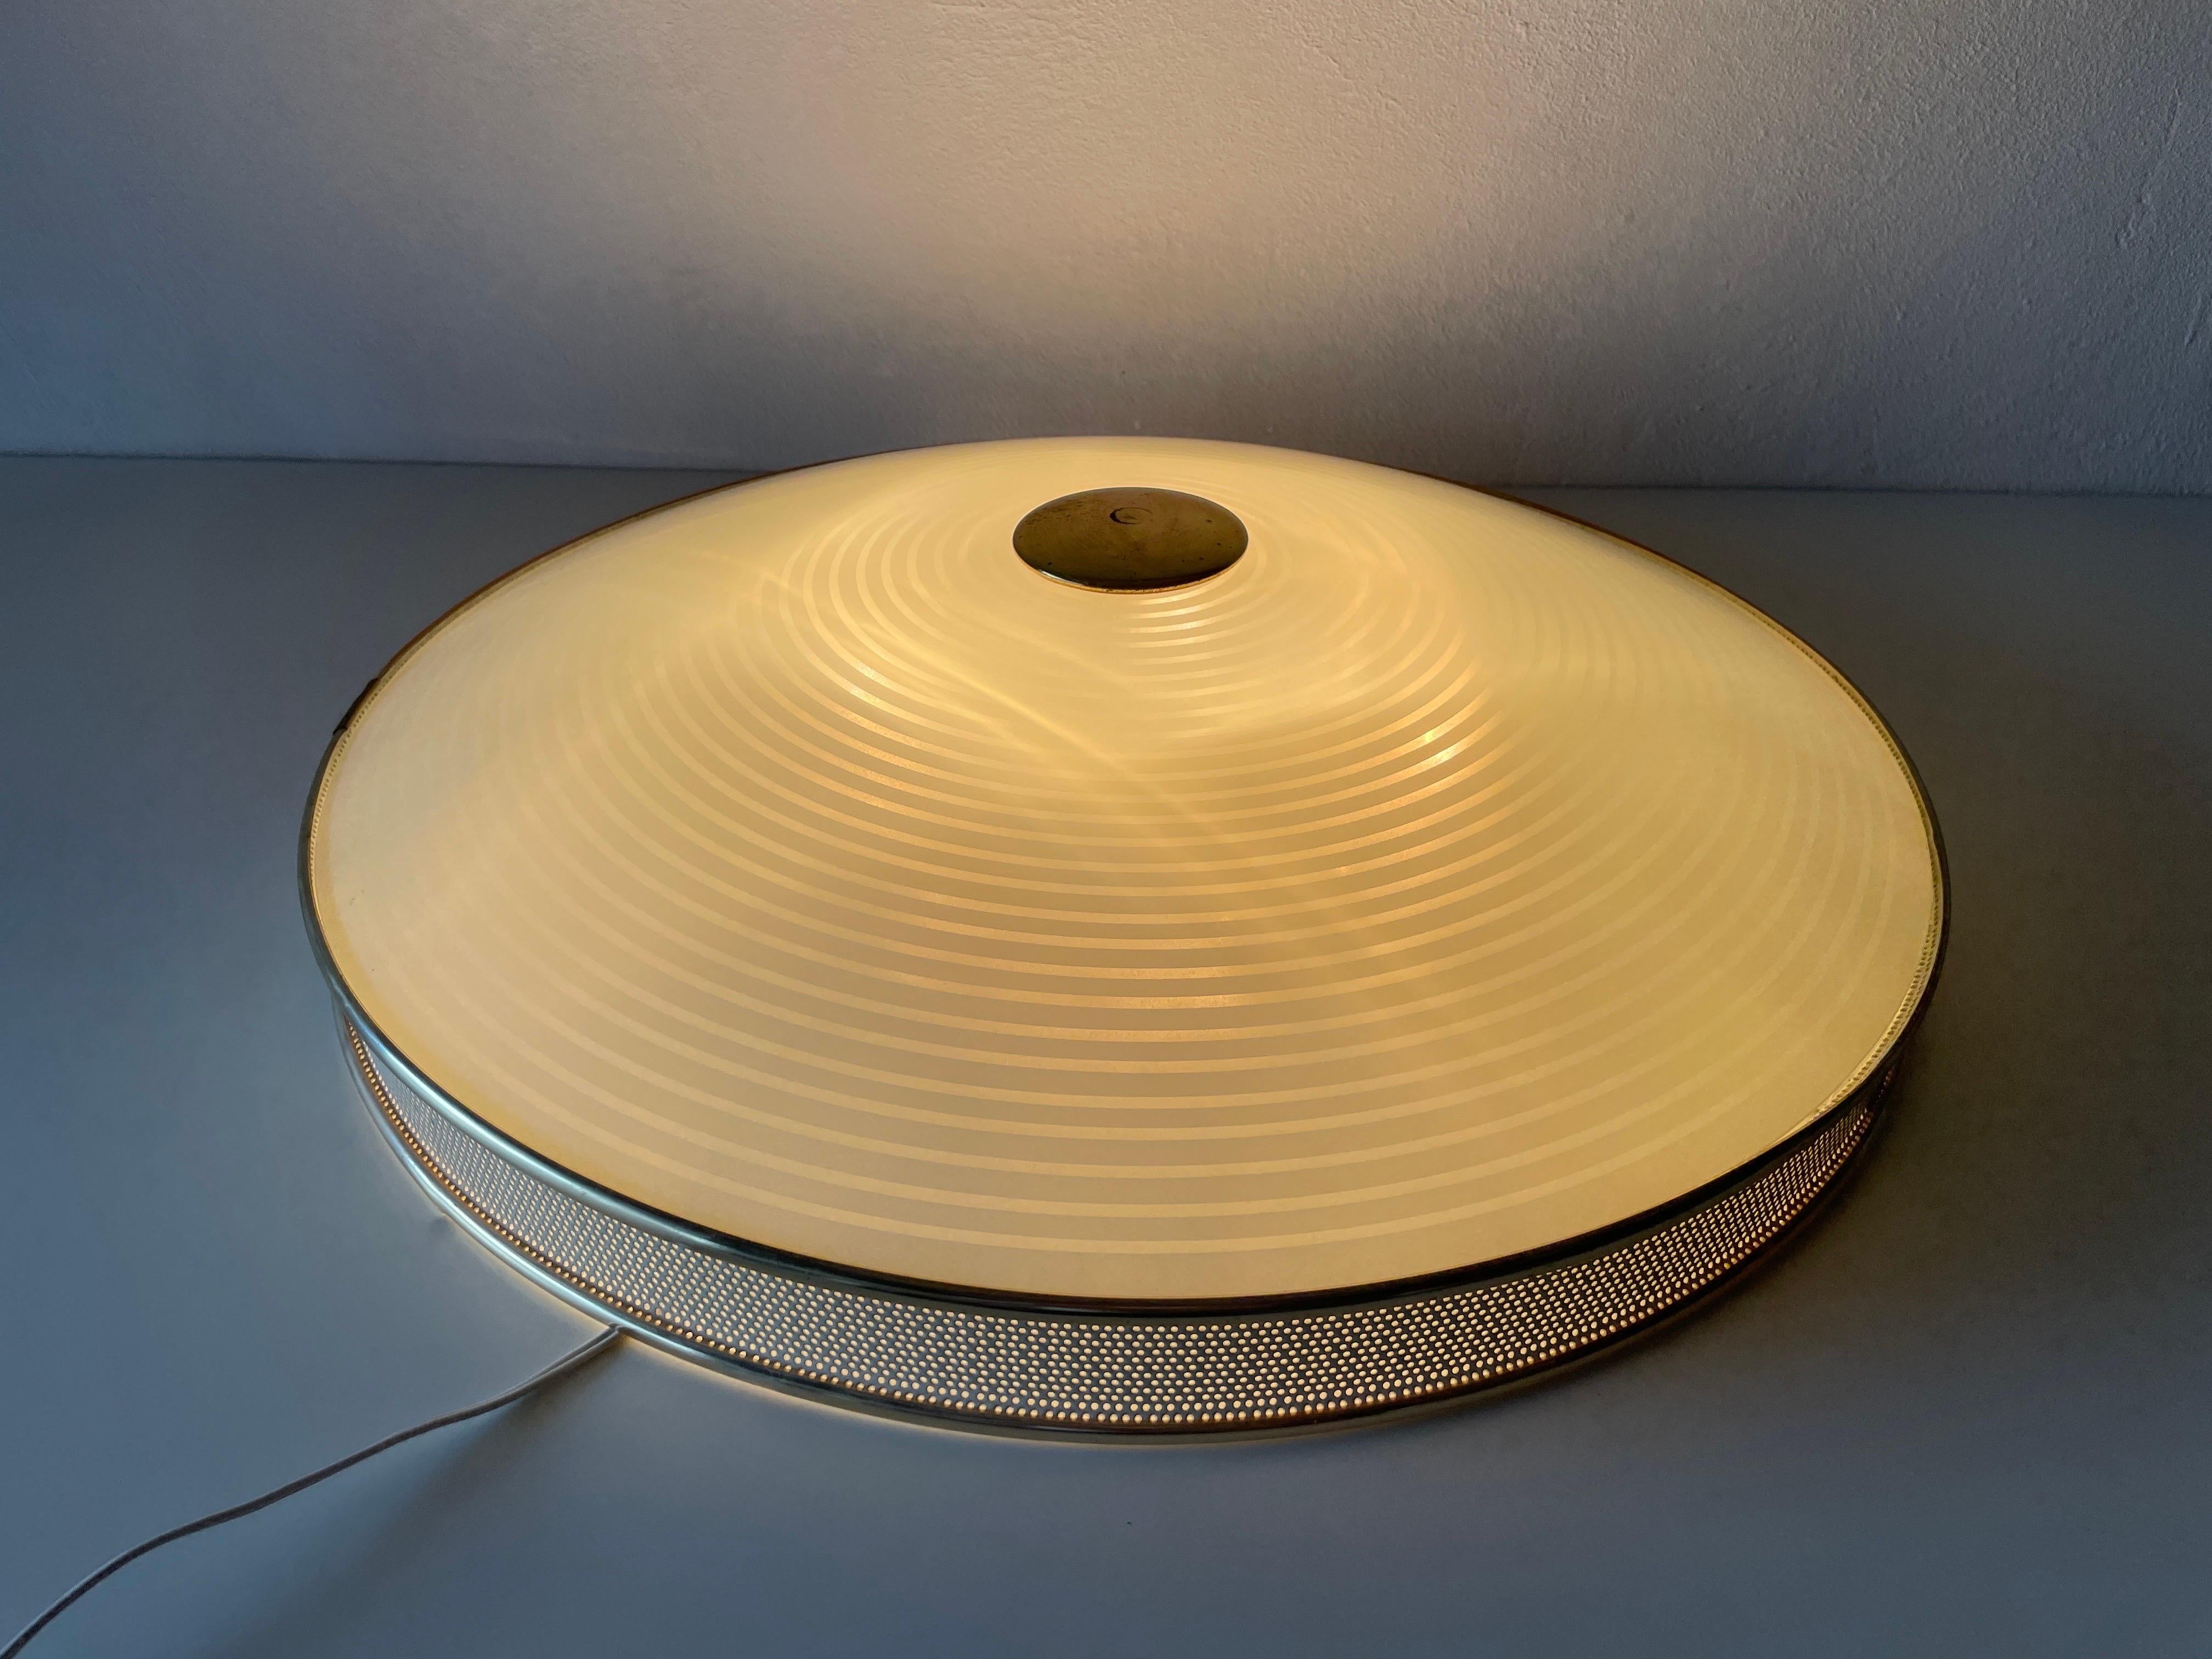 Ufo Design Glass Metal Flush Mount Ceiling Lamp by Hillebrand, 1950s, Germany For Sale 8